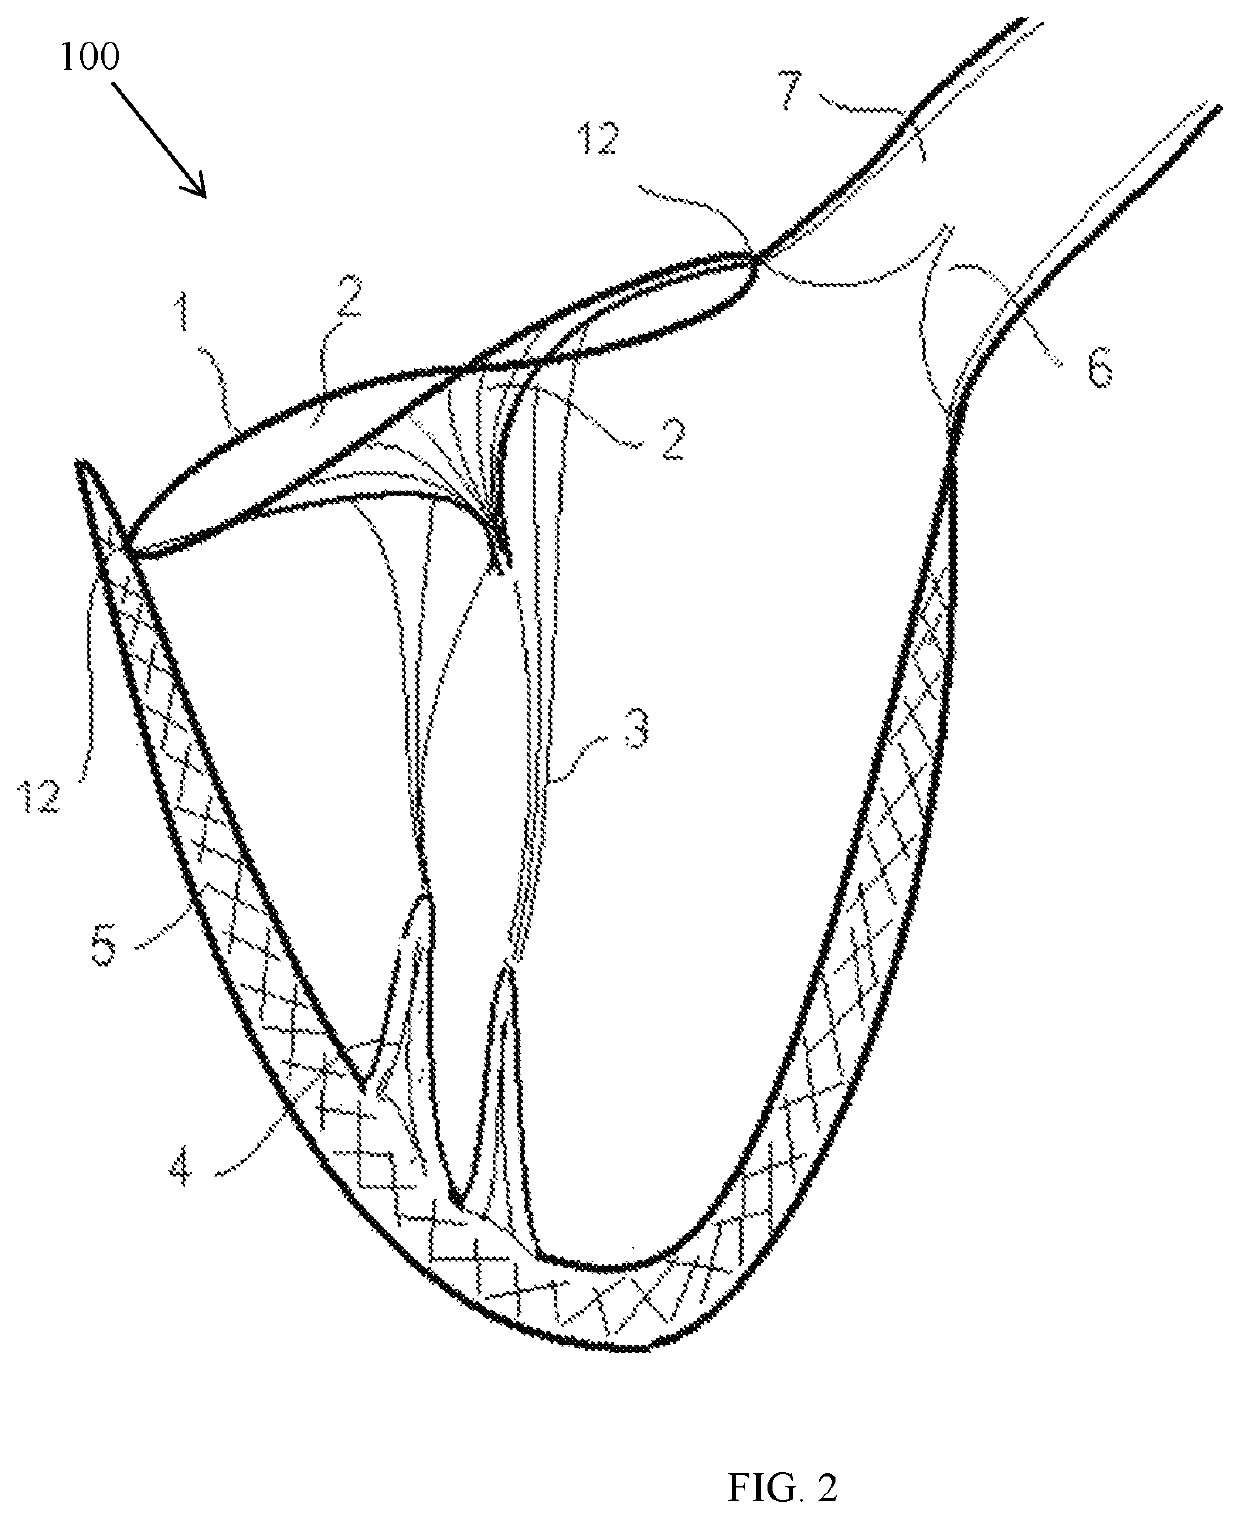 Naturally designed mitral prosthesis